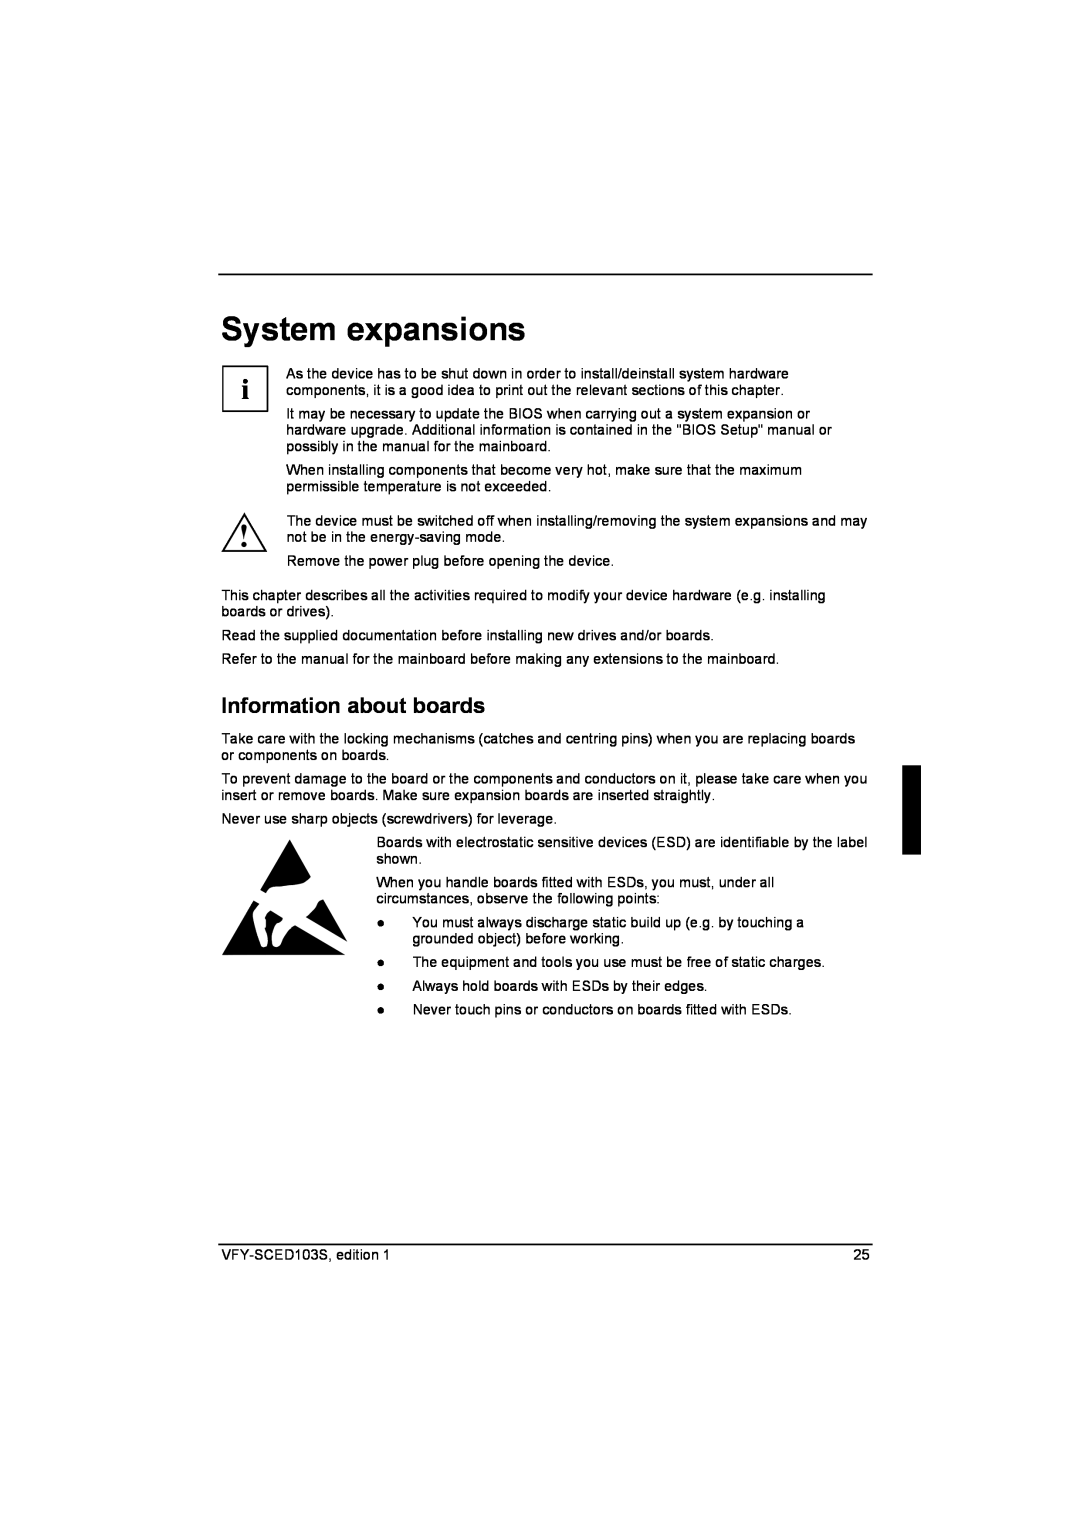 Fujitsu Siemens Computers X103 SFF manual System expansions, Information about boards 